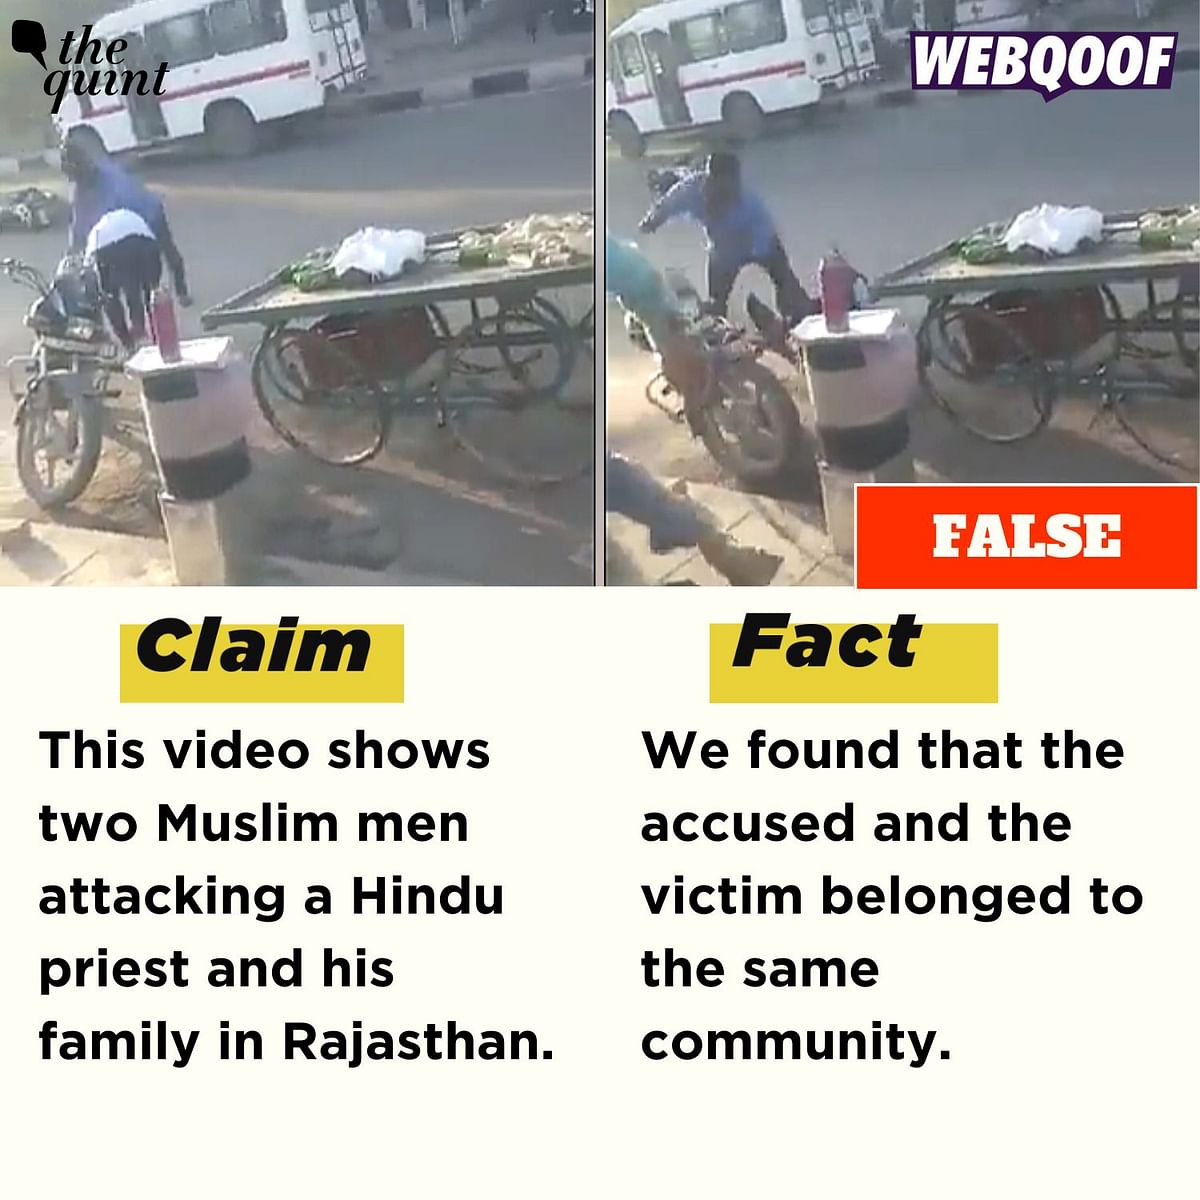 Here's a recap of some of the pieces of misinformation that went viral this week.